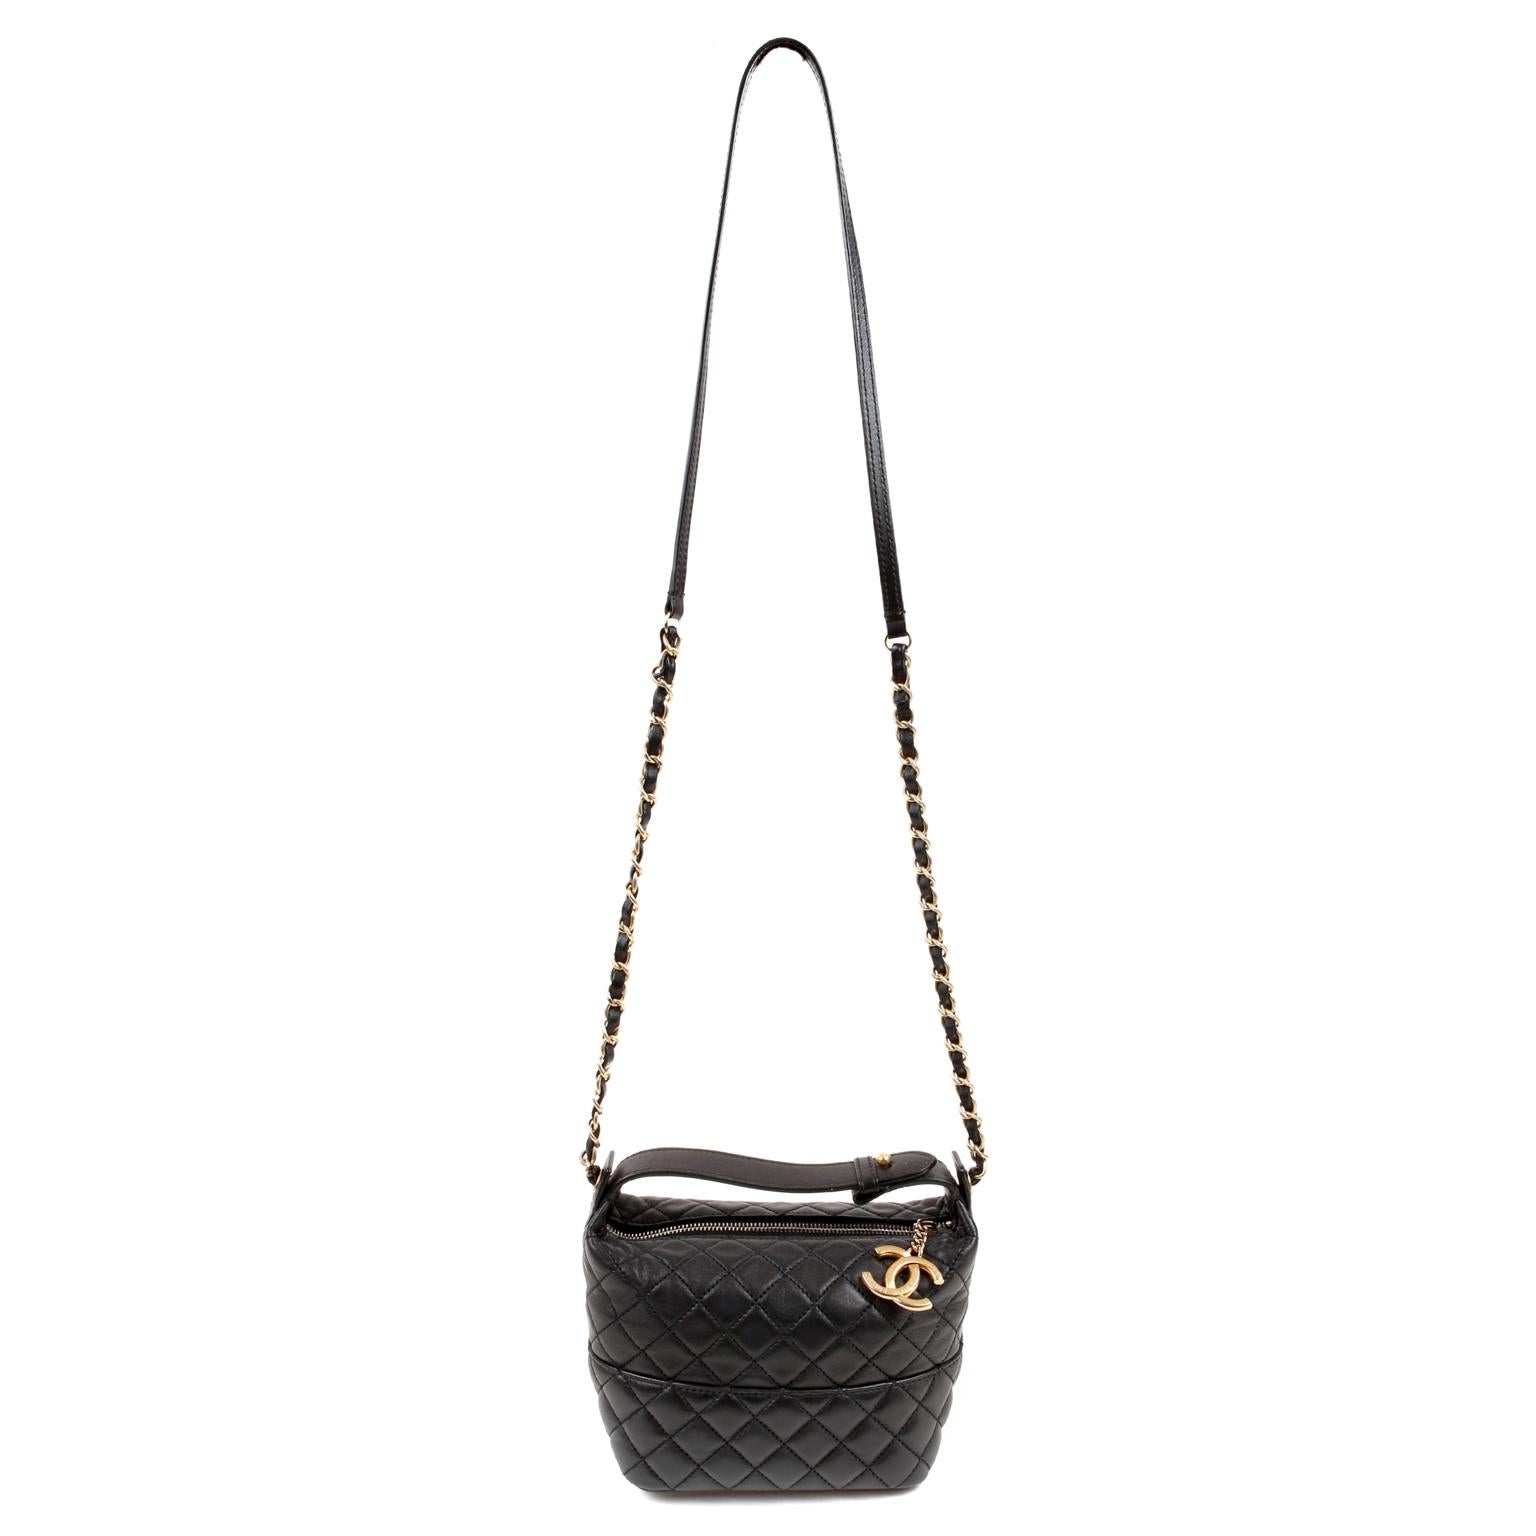 Chanel Black Quilted Leather Crossbody Bag 1